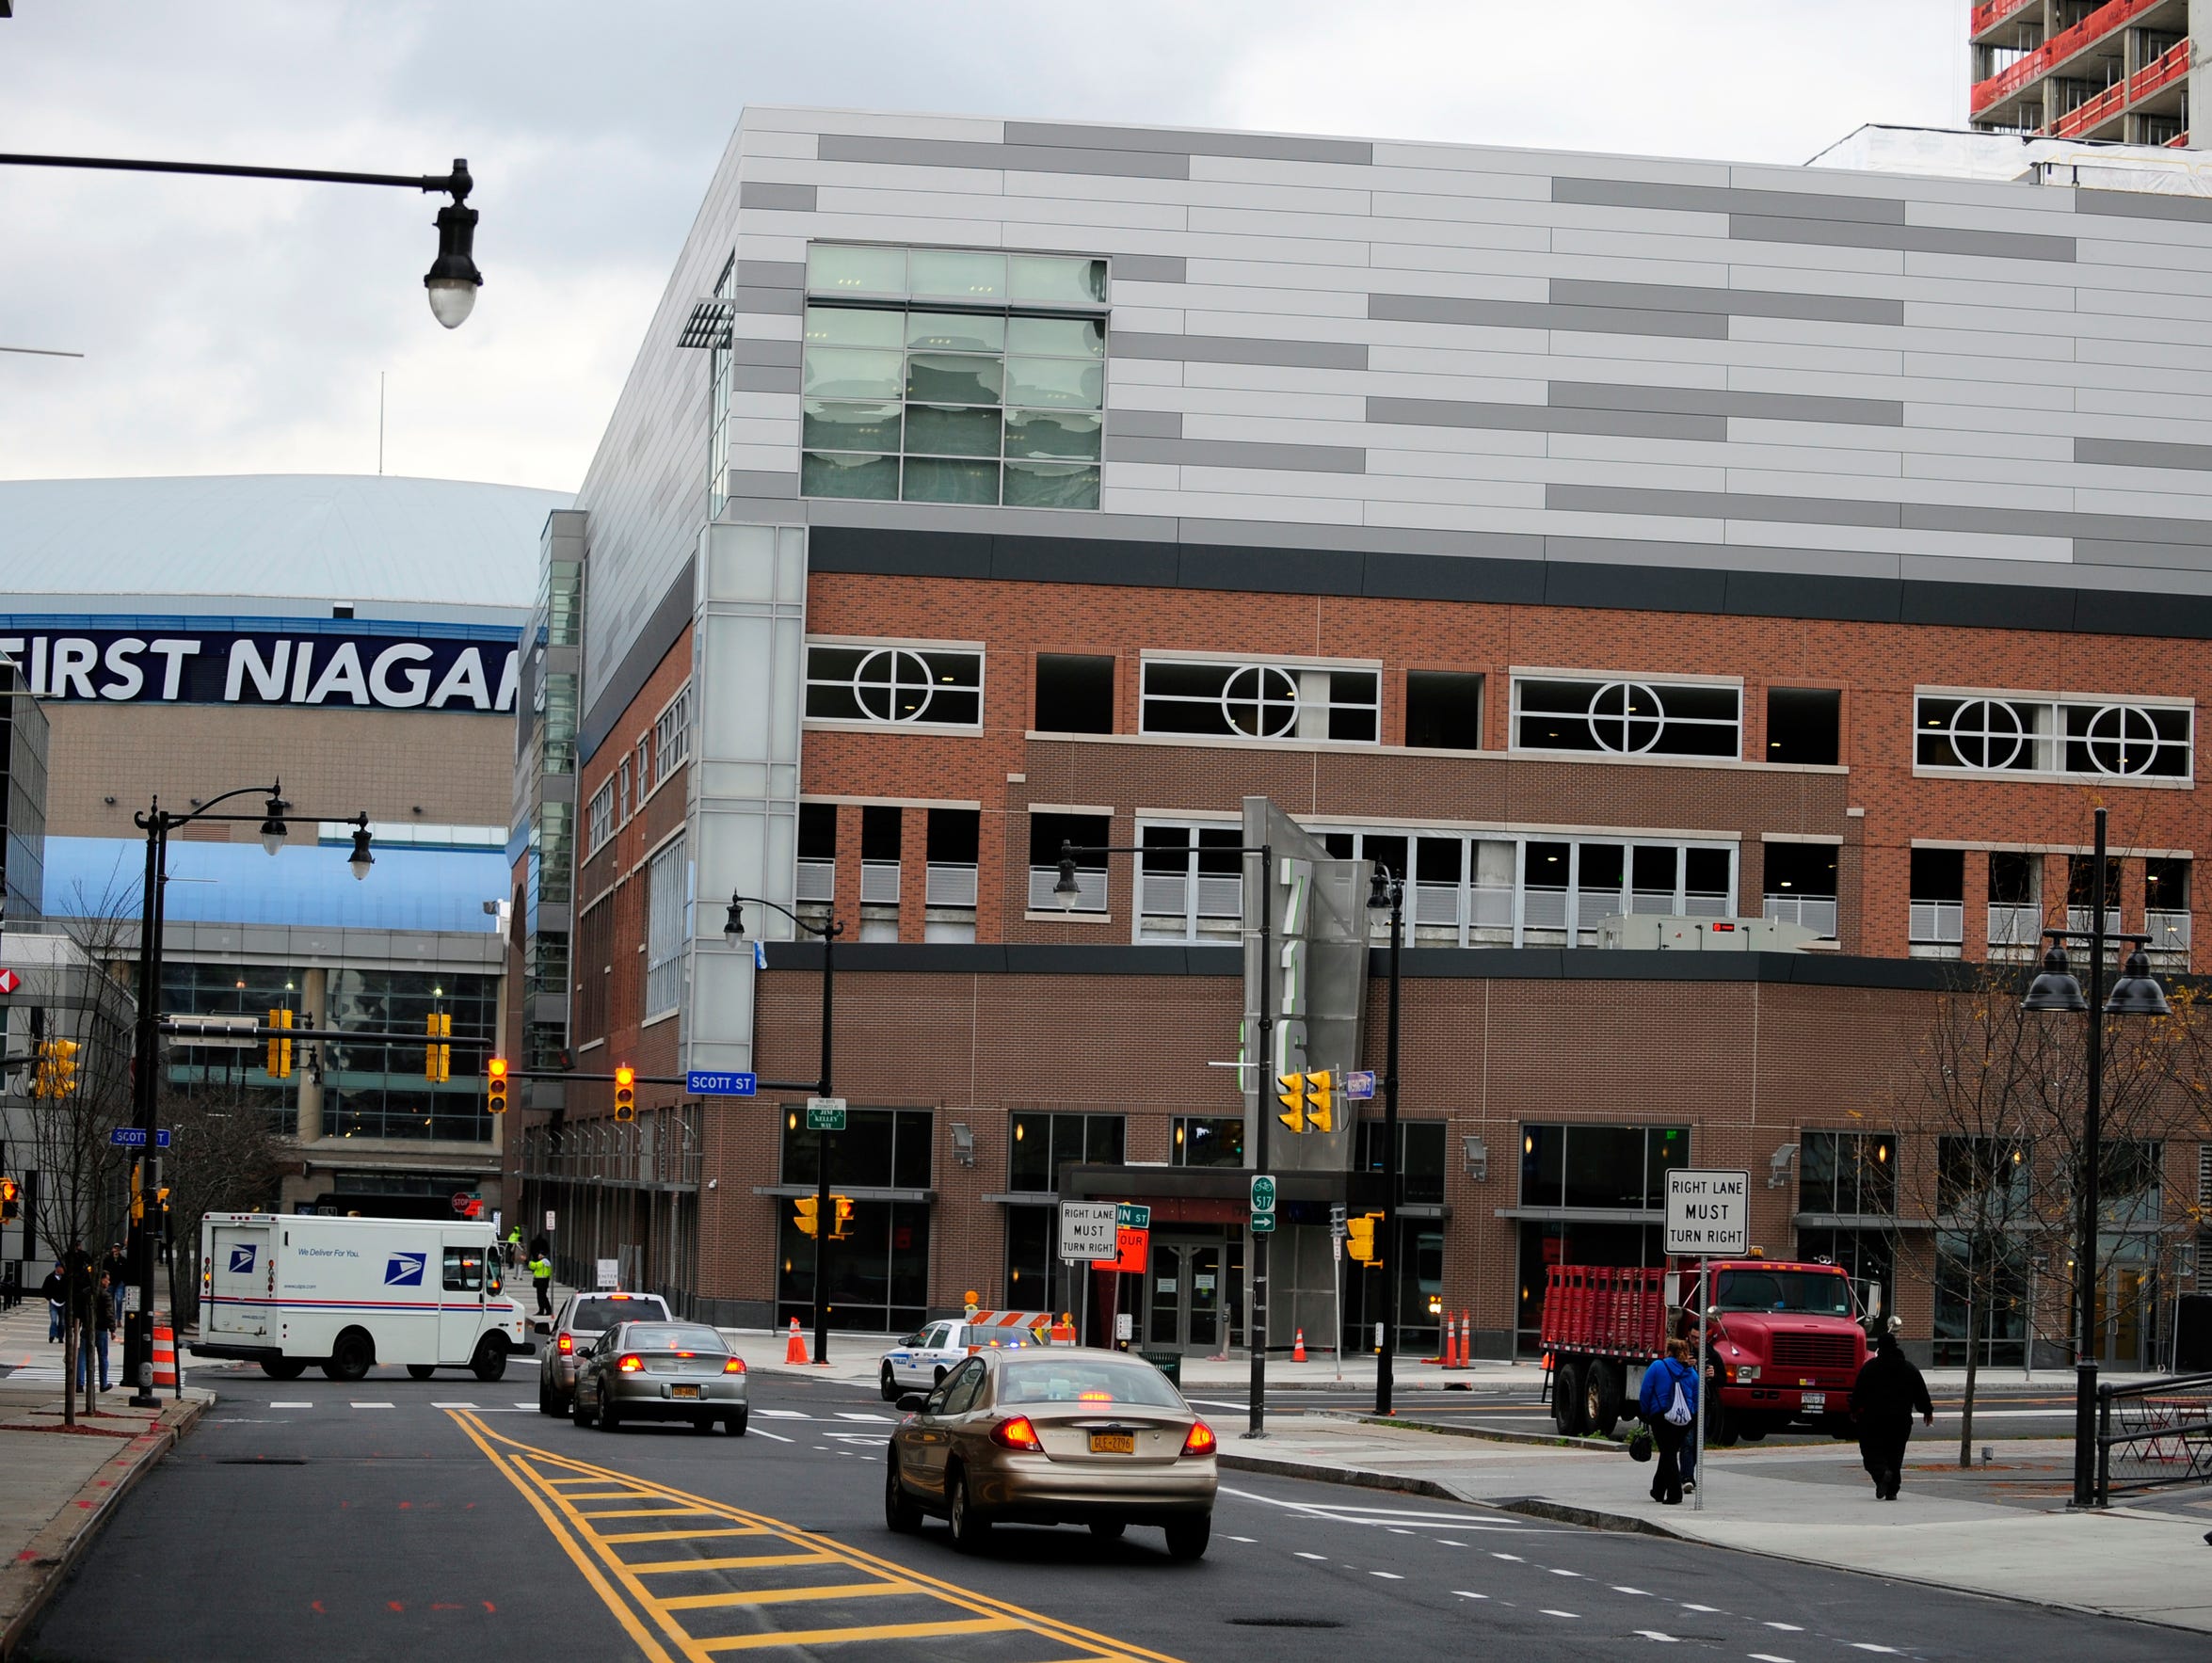 Traffic starts to flow in front of HarborCenter, which